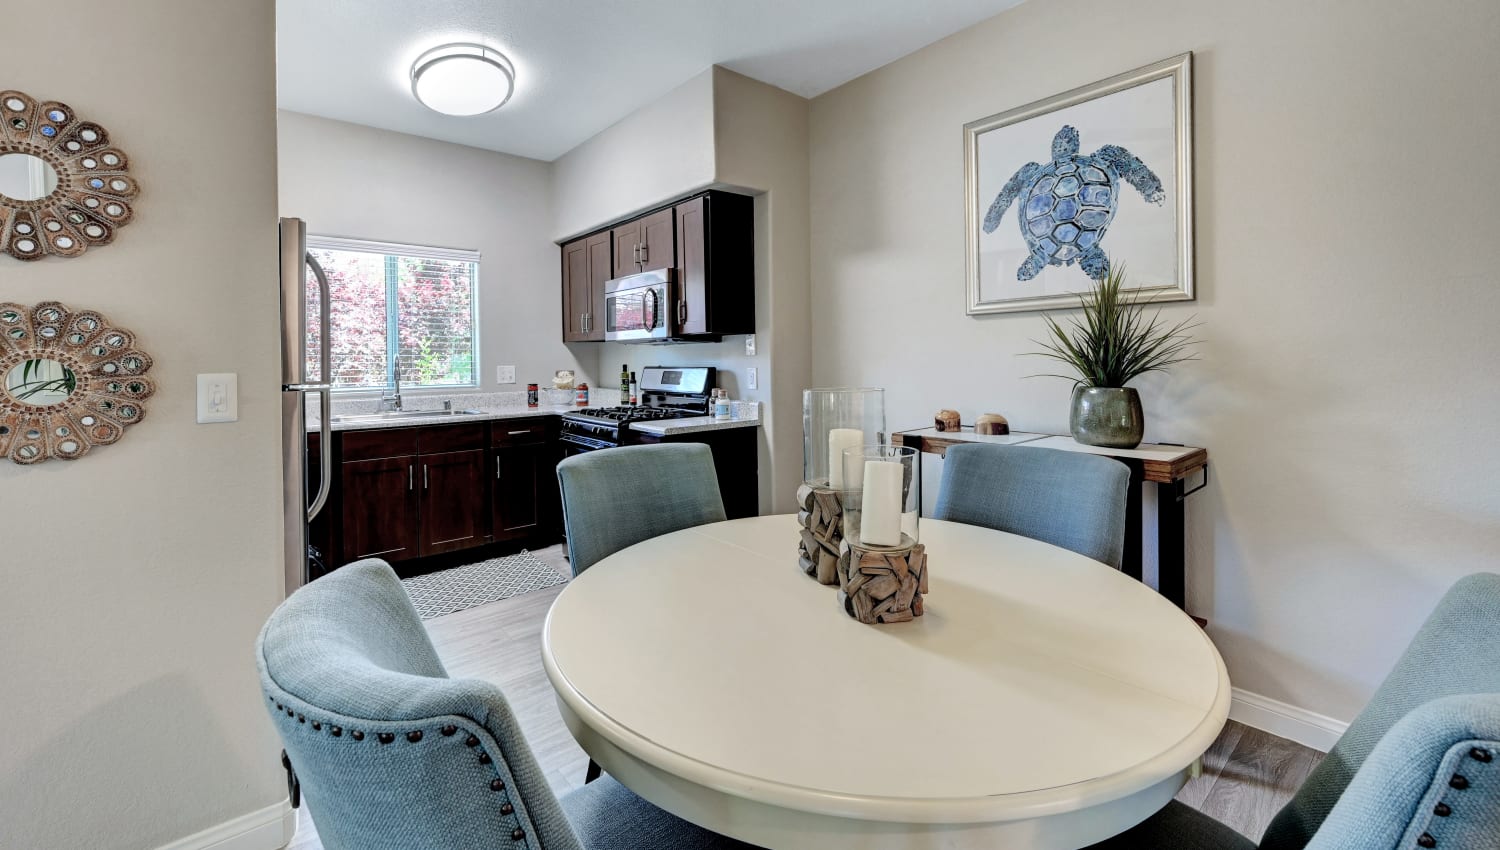 Dining area and kitchen at Horizon Ridge Apartments in Henderson, Nevada